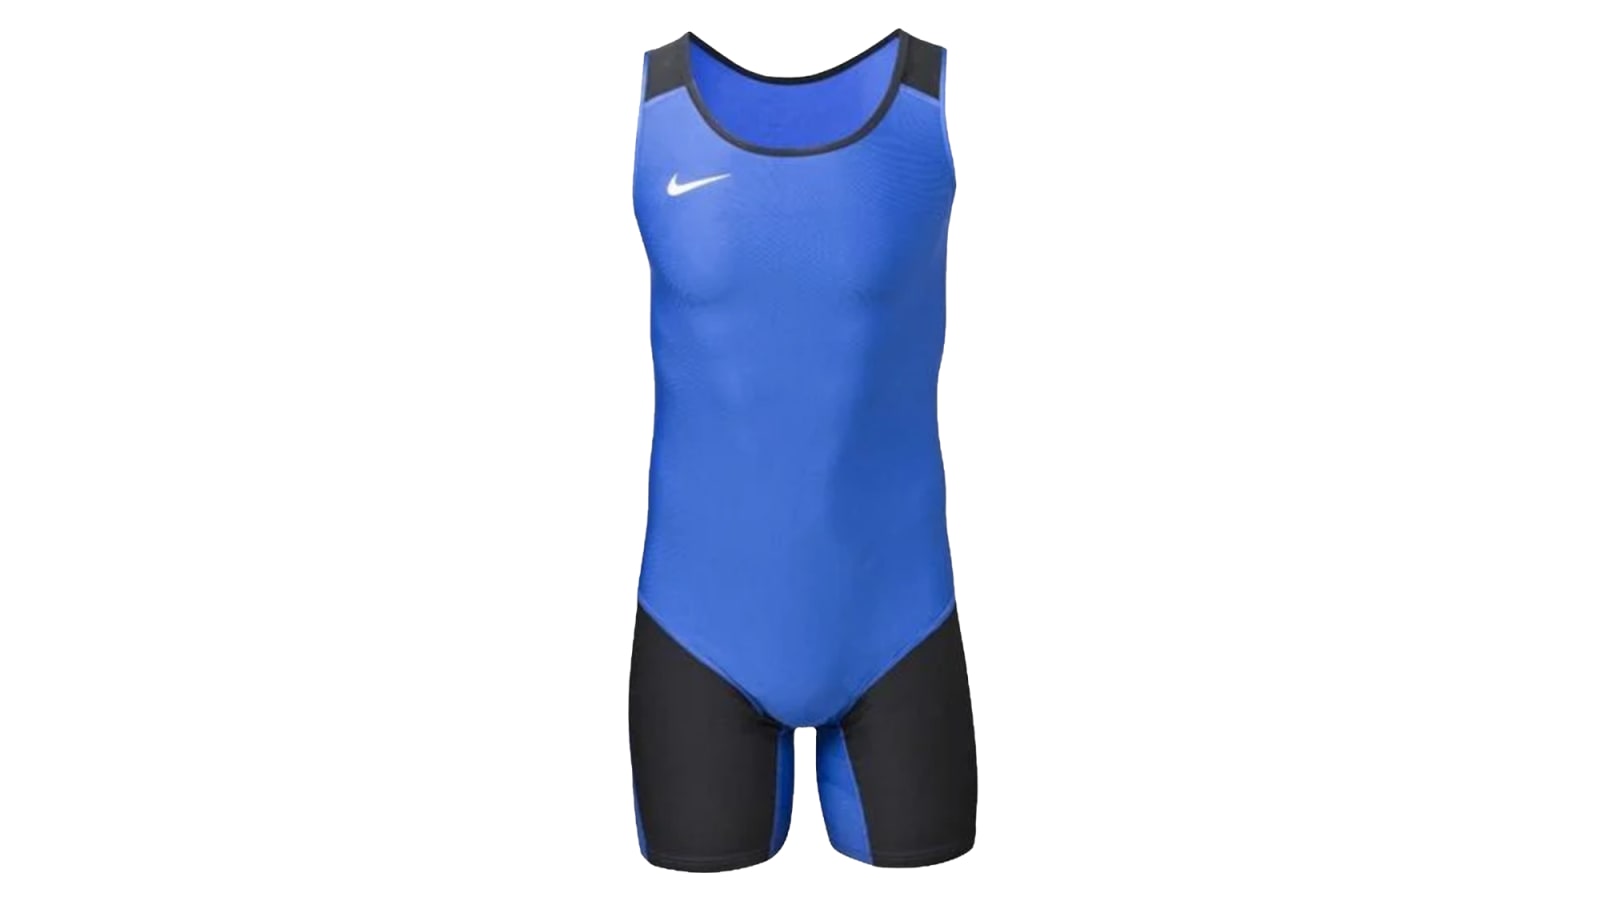 Weightlifting Body Suit